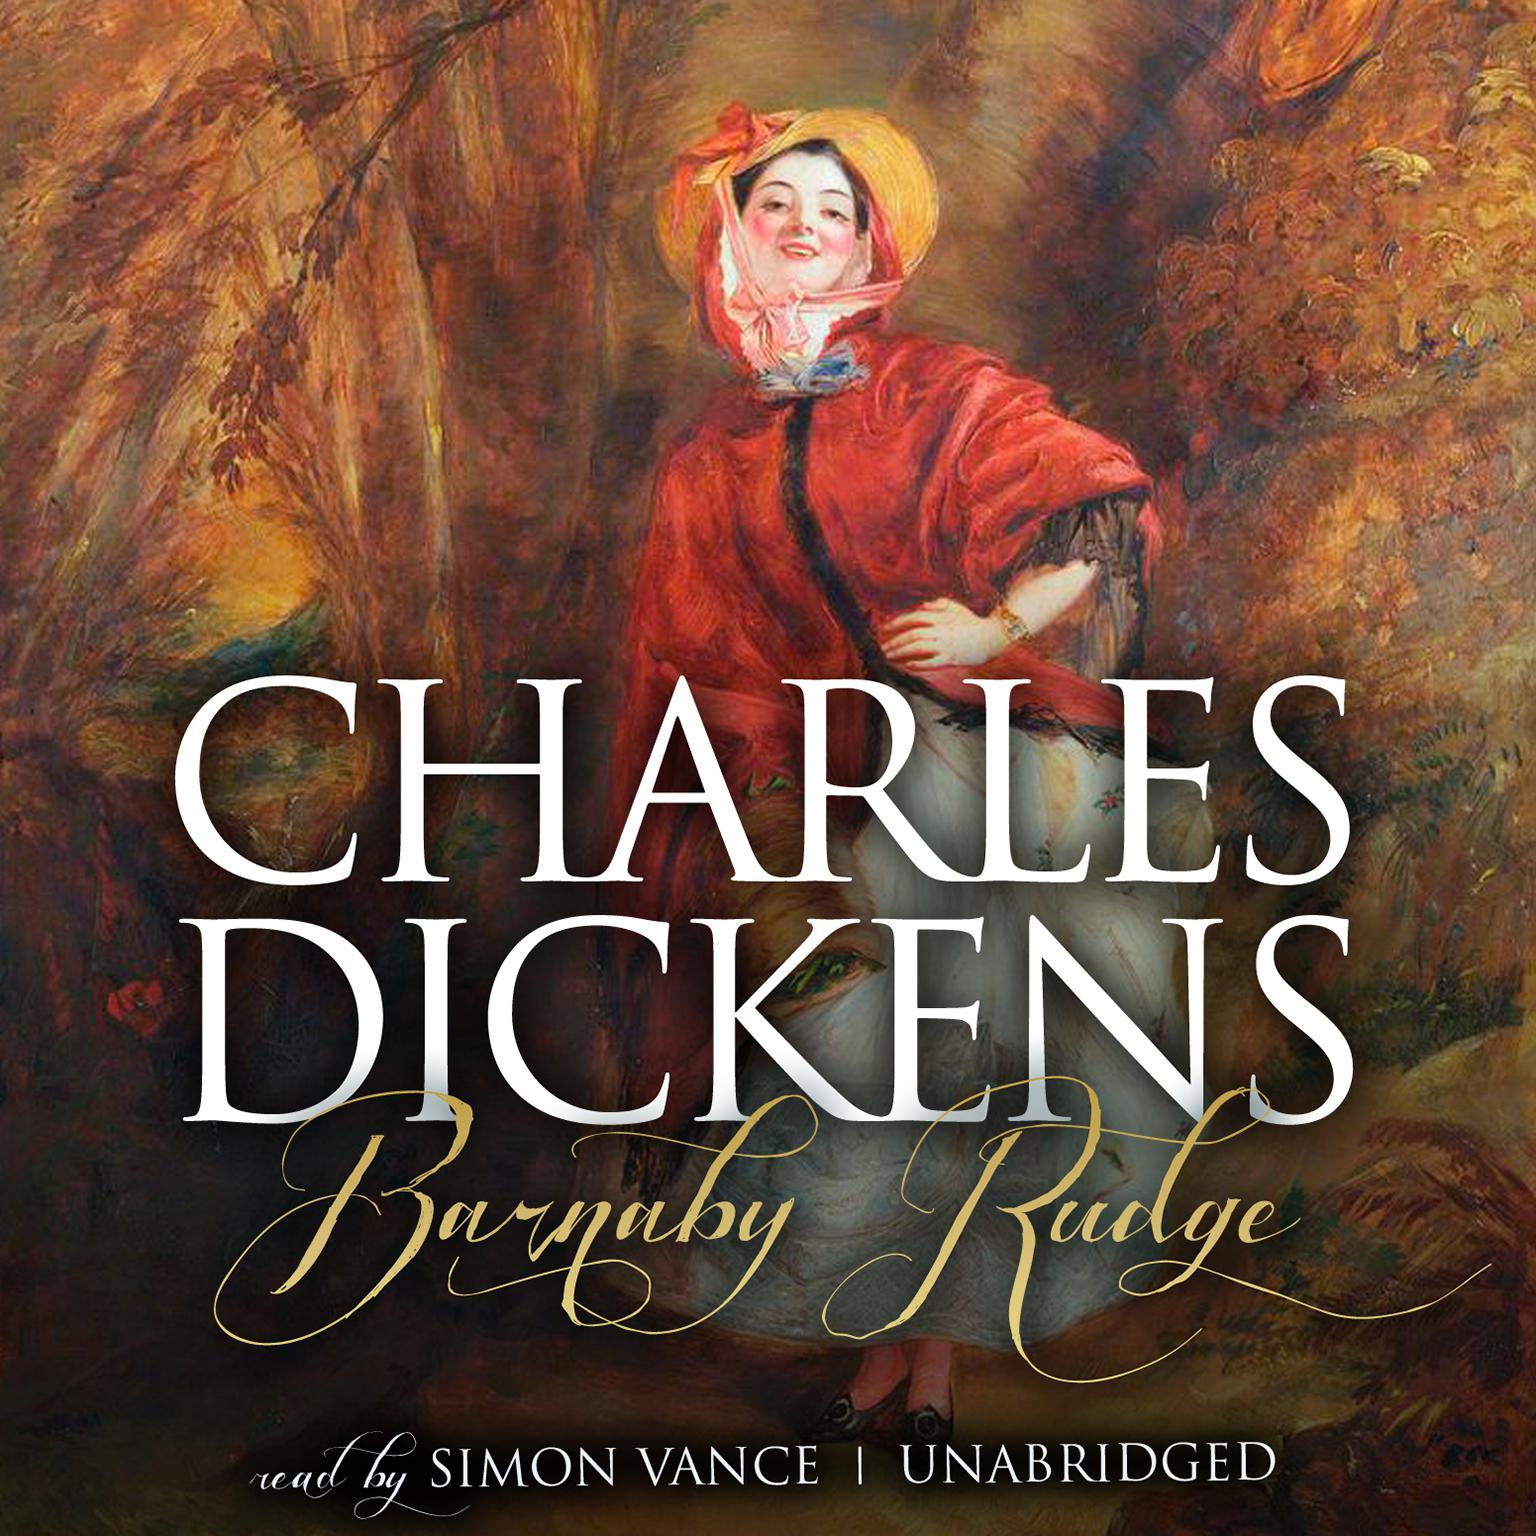 Barnaby Rudge Audiobook, by Charles Dickens